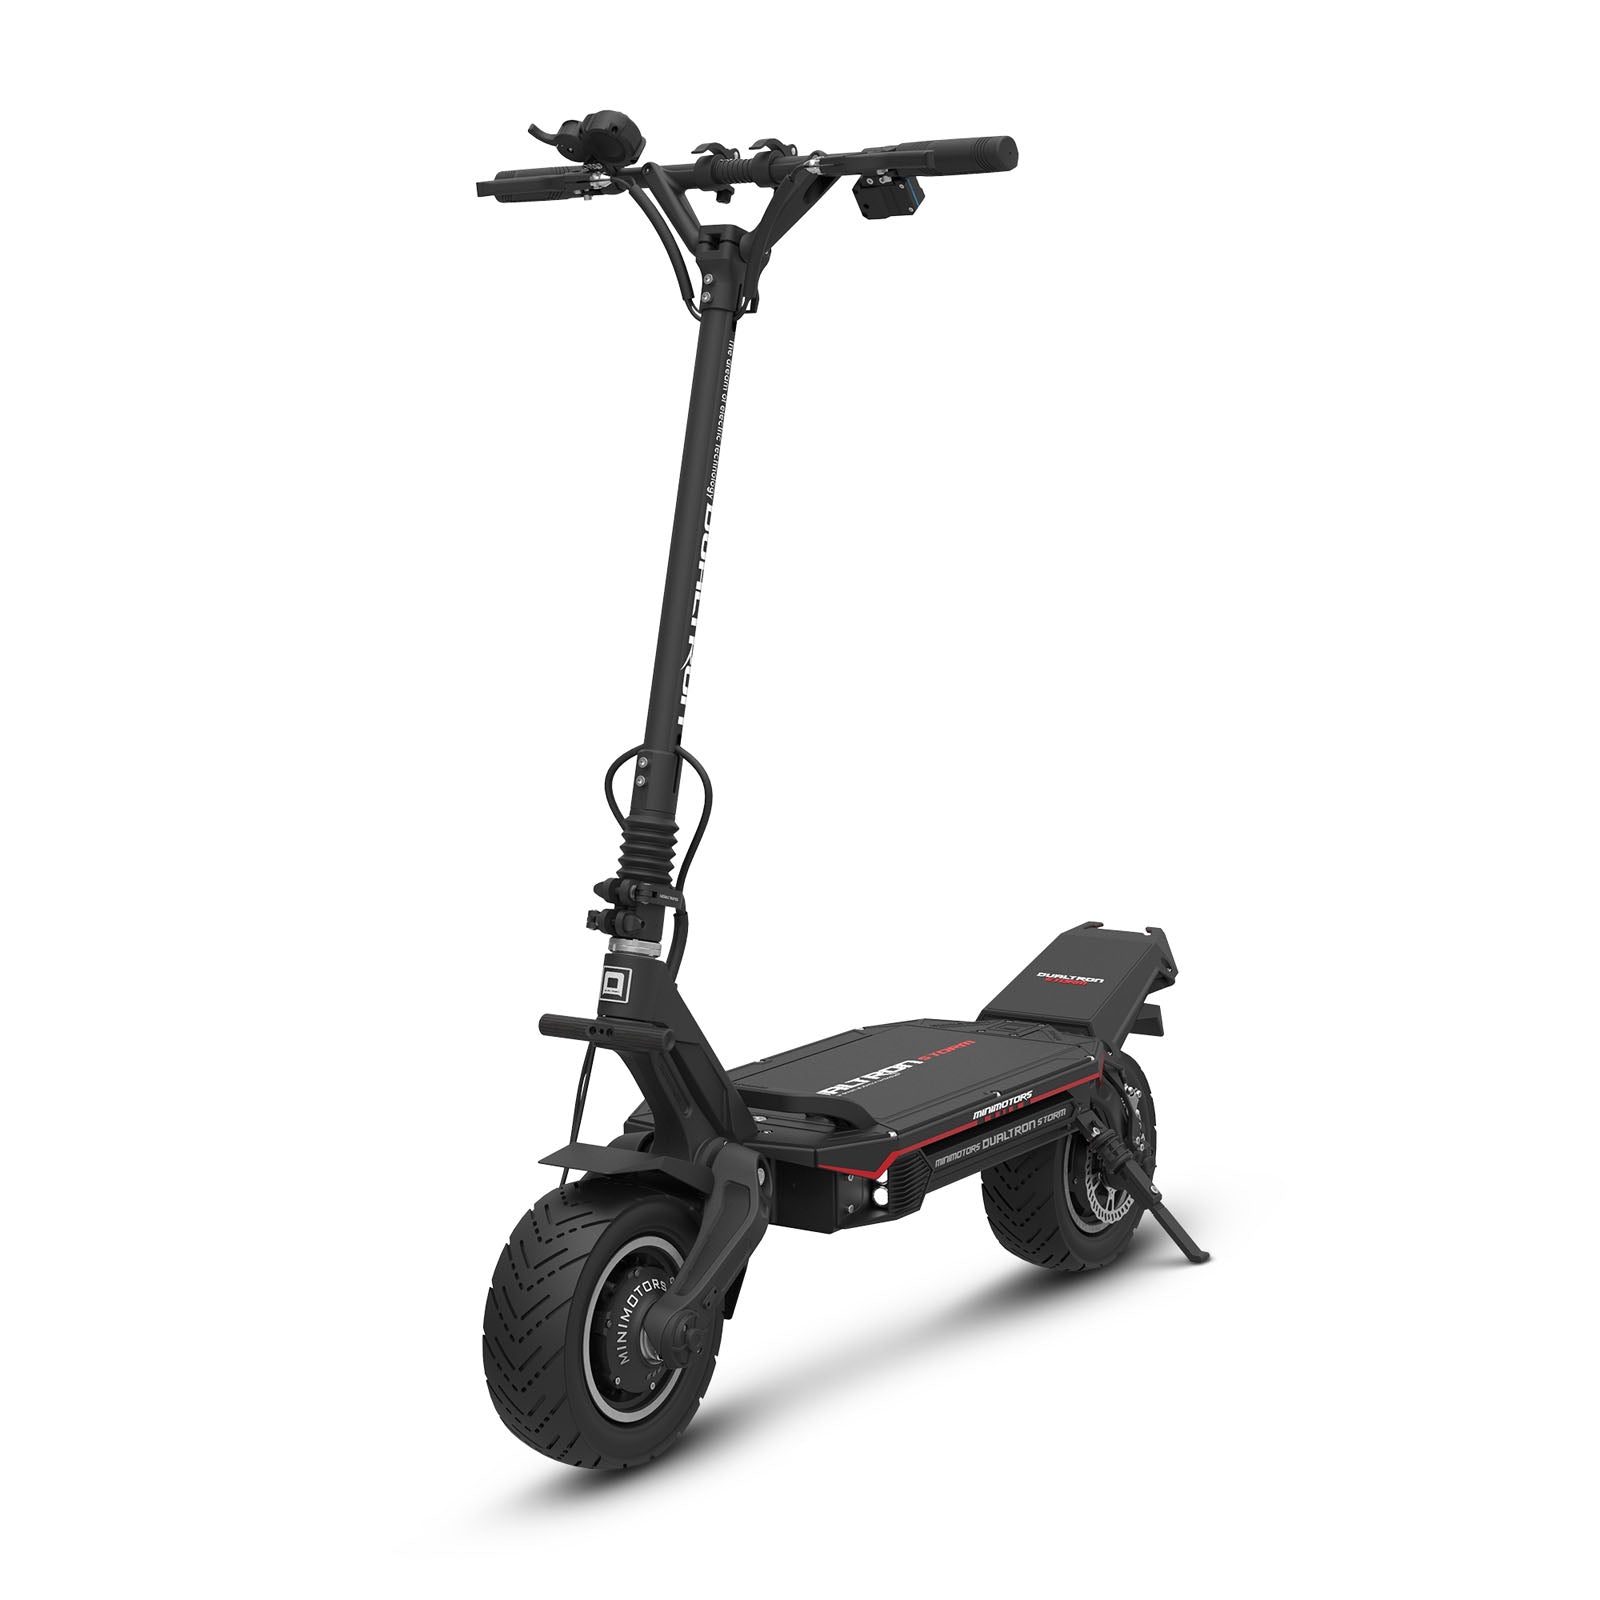 Dualtron Storm - Premium Scooter - Fast and Reliable - Minimotors USA